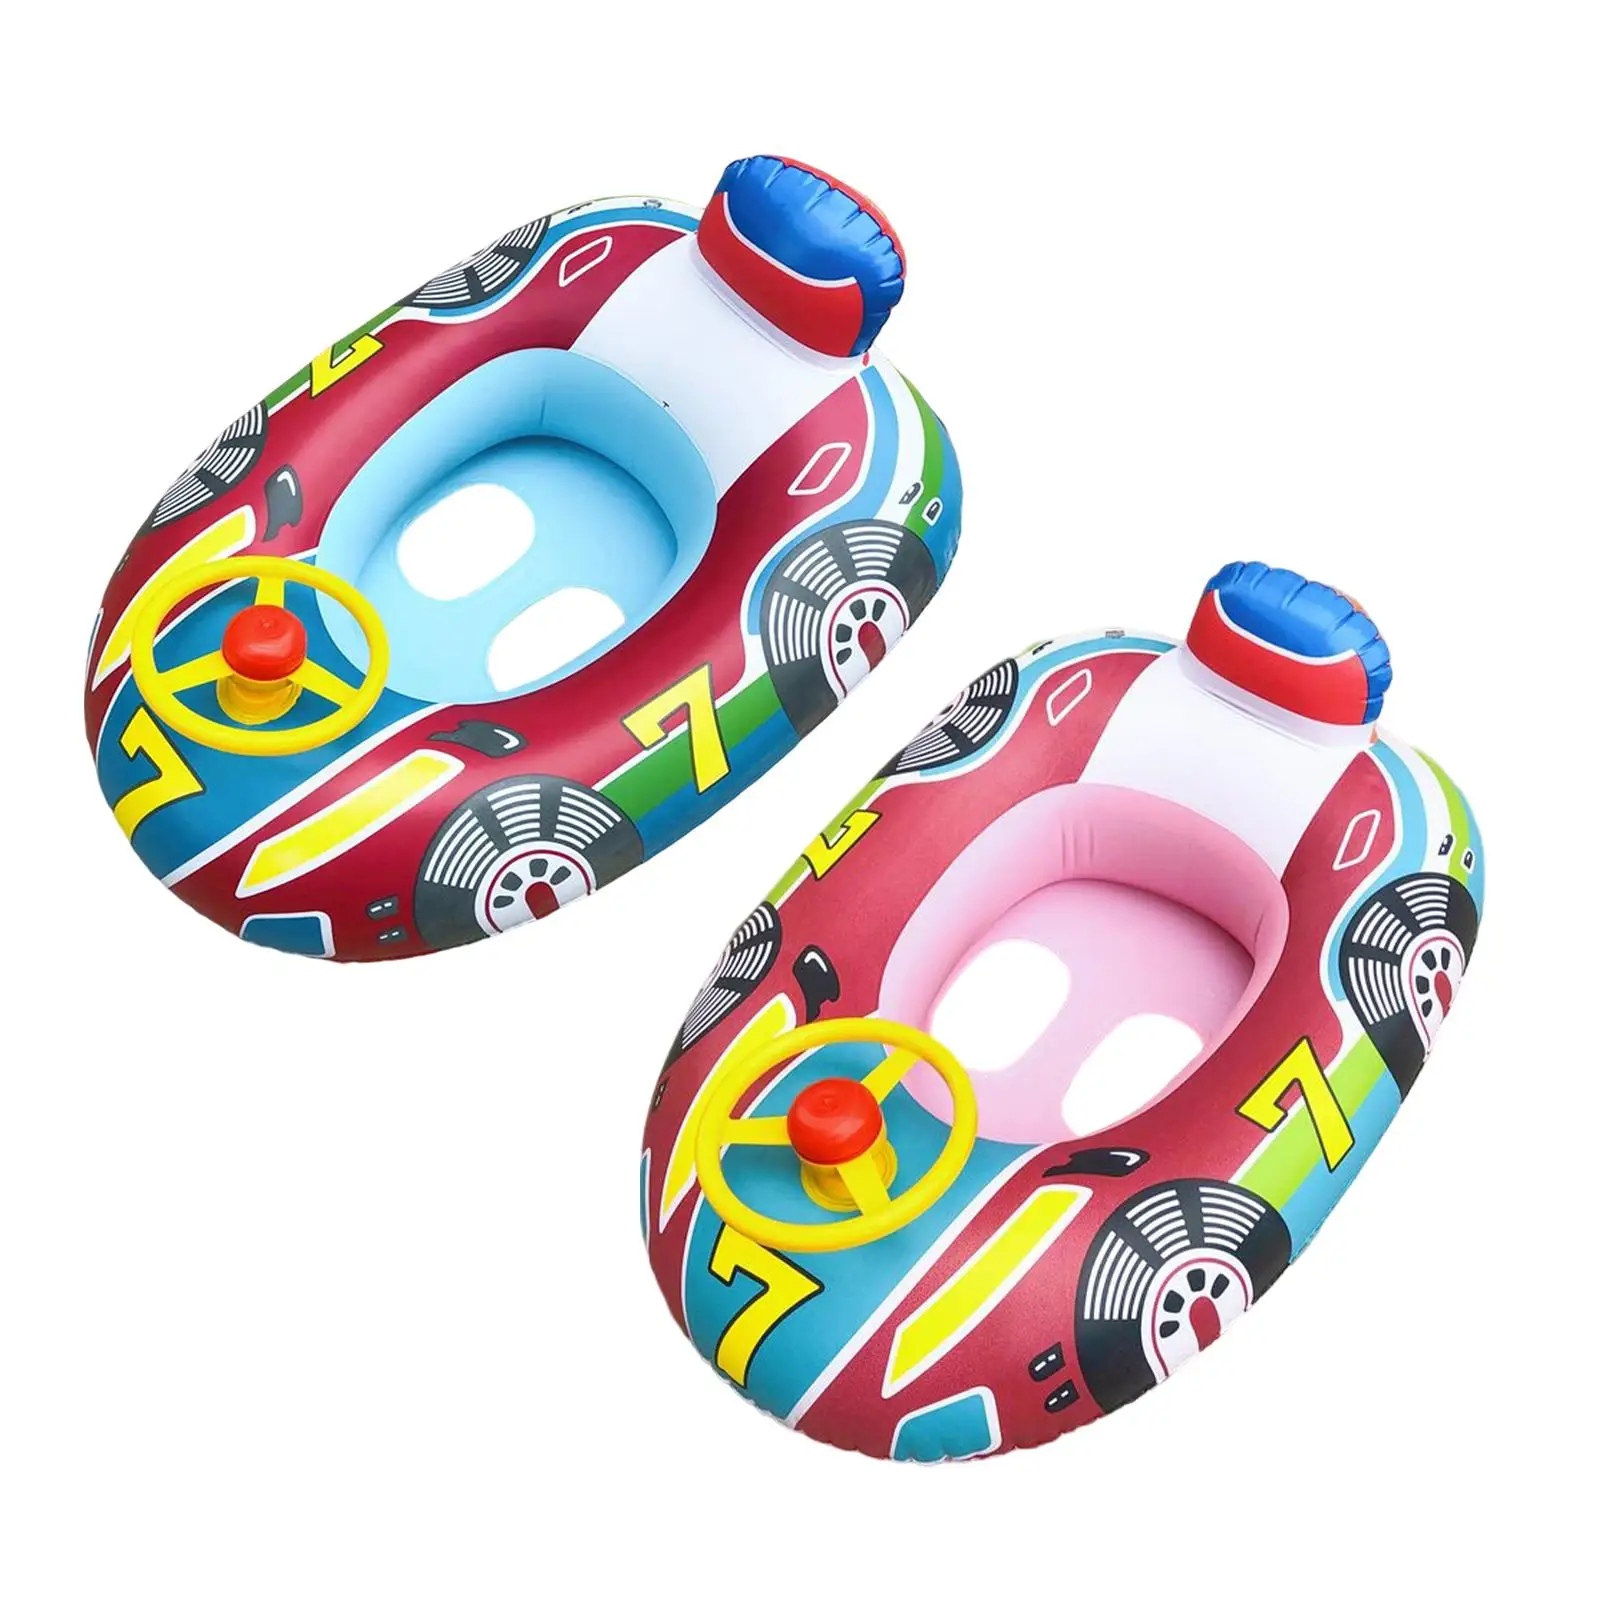 Swimming Float Seat Toys Swim Trainer Boat Beach for Holidays Baby Children